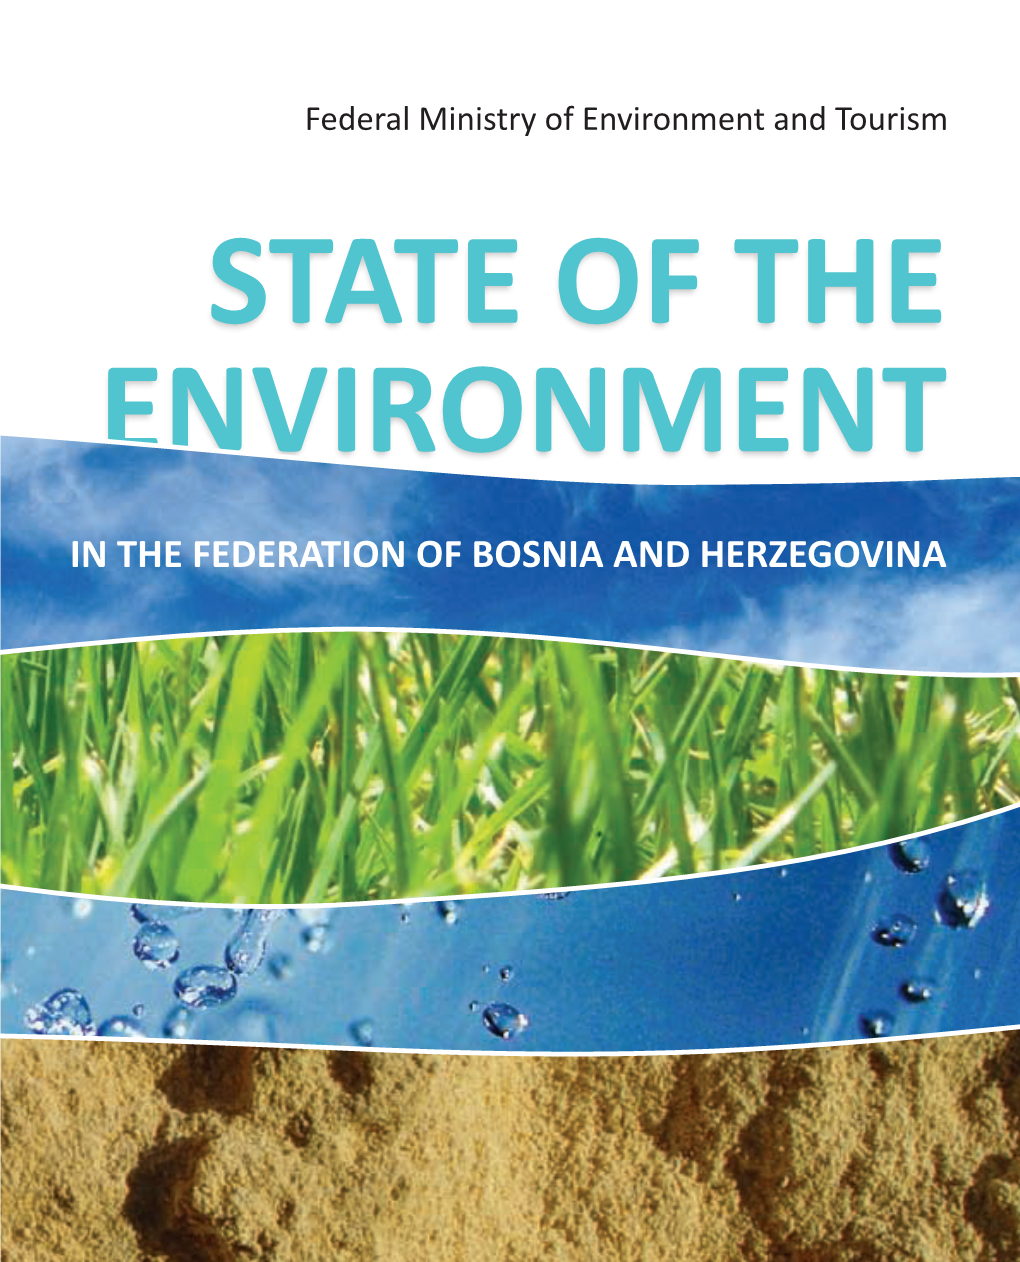 State of the Environment in Federation of Bosnia And